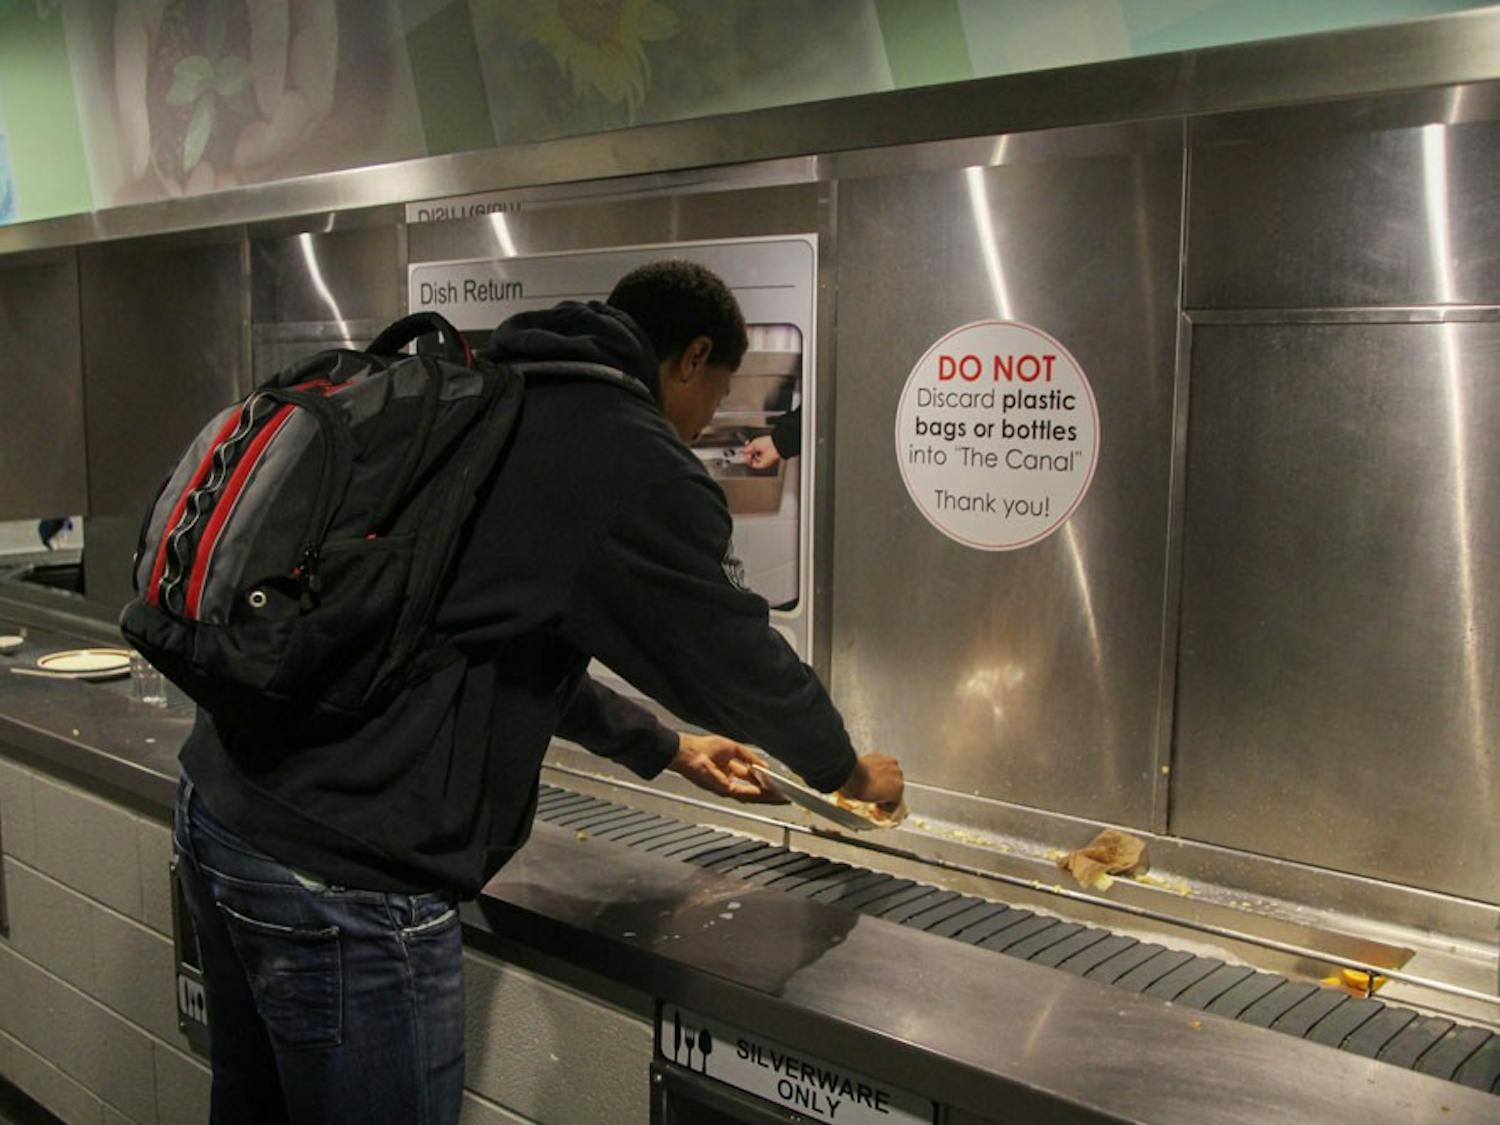 Crossroads Culinary Center (C3) in the Ellicott Complex features a waste disposal stream. In an effort to reduce waste, the food is decomposed and nutrients are returned to soil.